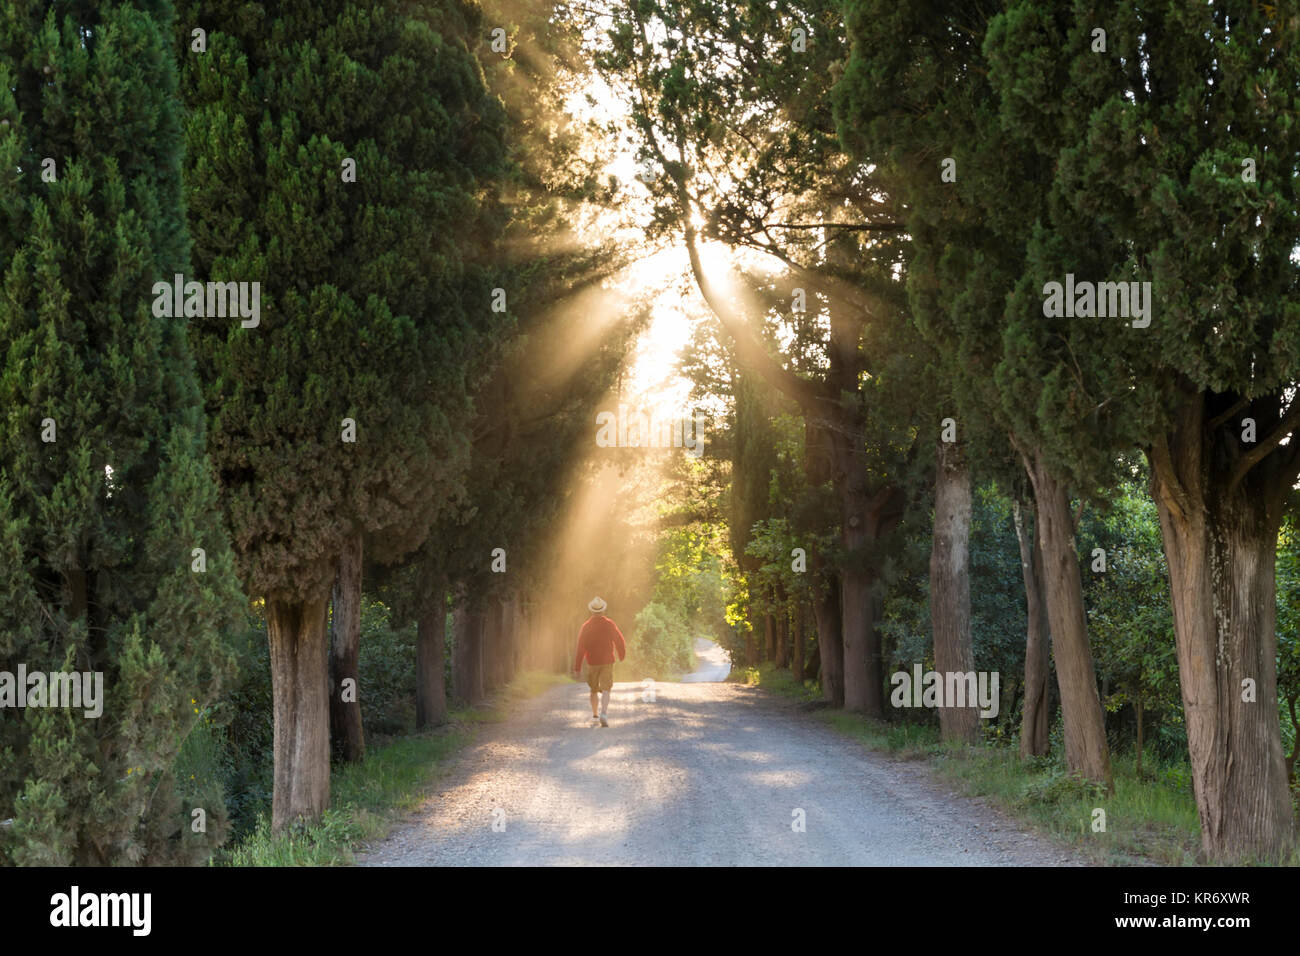 Rear view of man walking along path lined with Cypress trees, sunlight filtering through foliage. Stock Photo